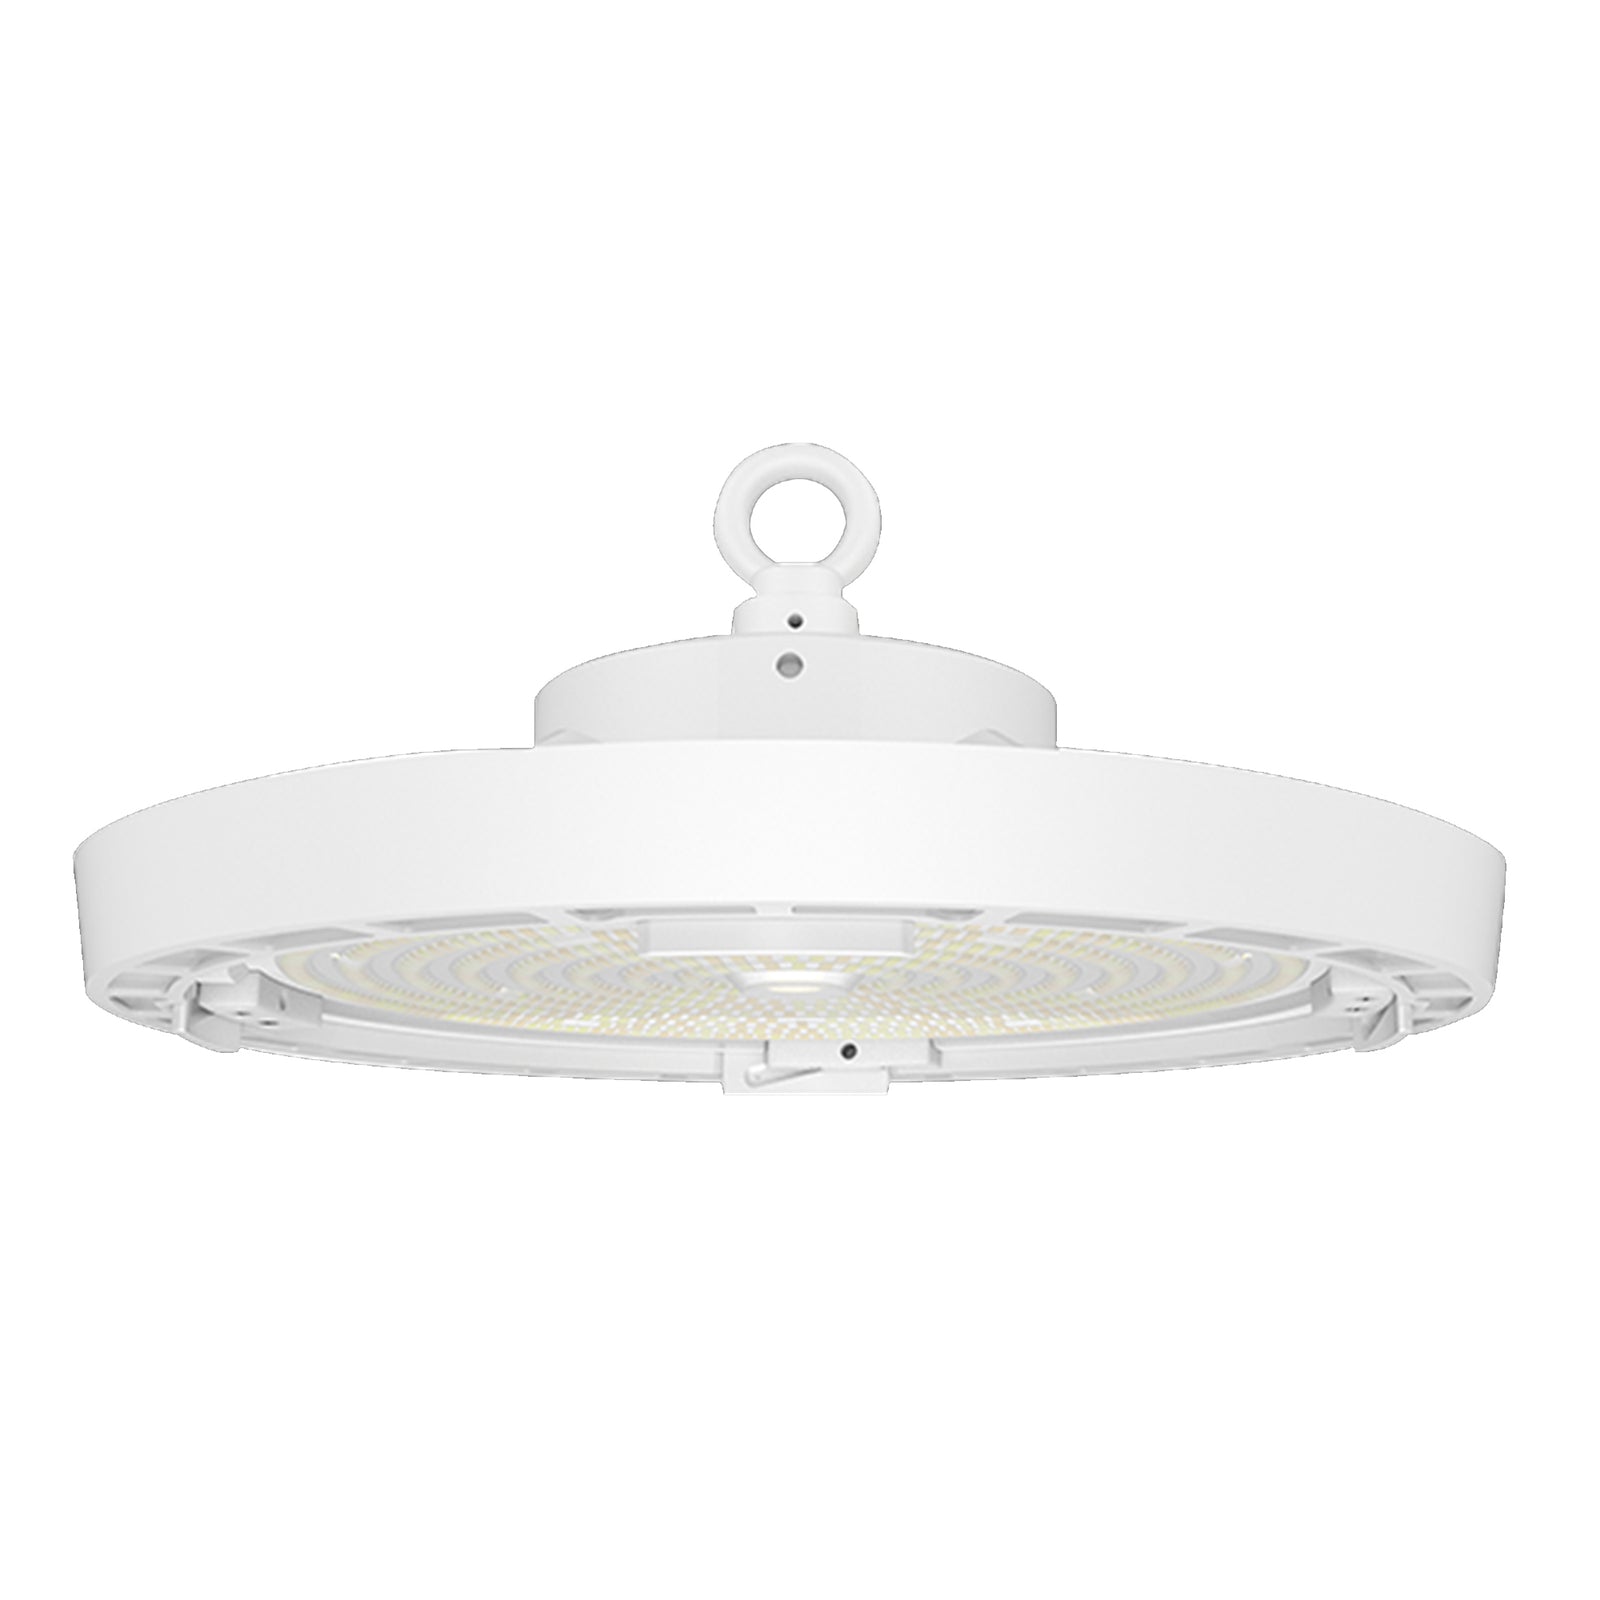 Commercial UFO LED High Bay Light 150/200/240W, 4000/5000K Tunable, 38400Lm, IP65 Waterproof, Dimmable 0-10V - Ideal for High Ceiling Areas, Warehouses, Workshops, Factories, Garages, and Barns White